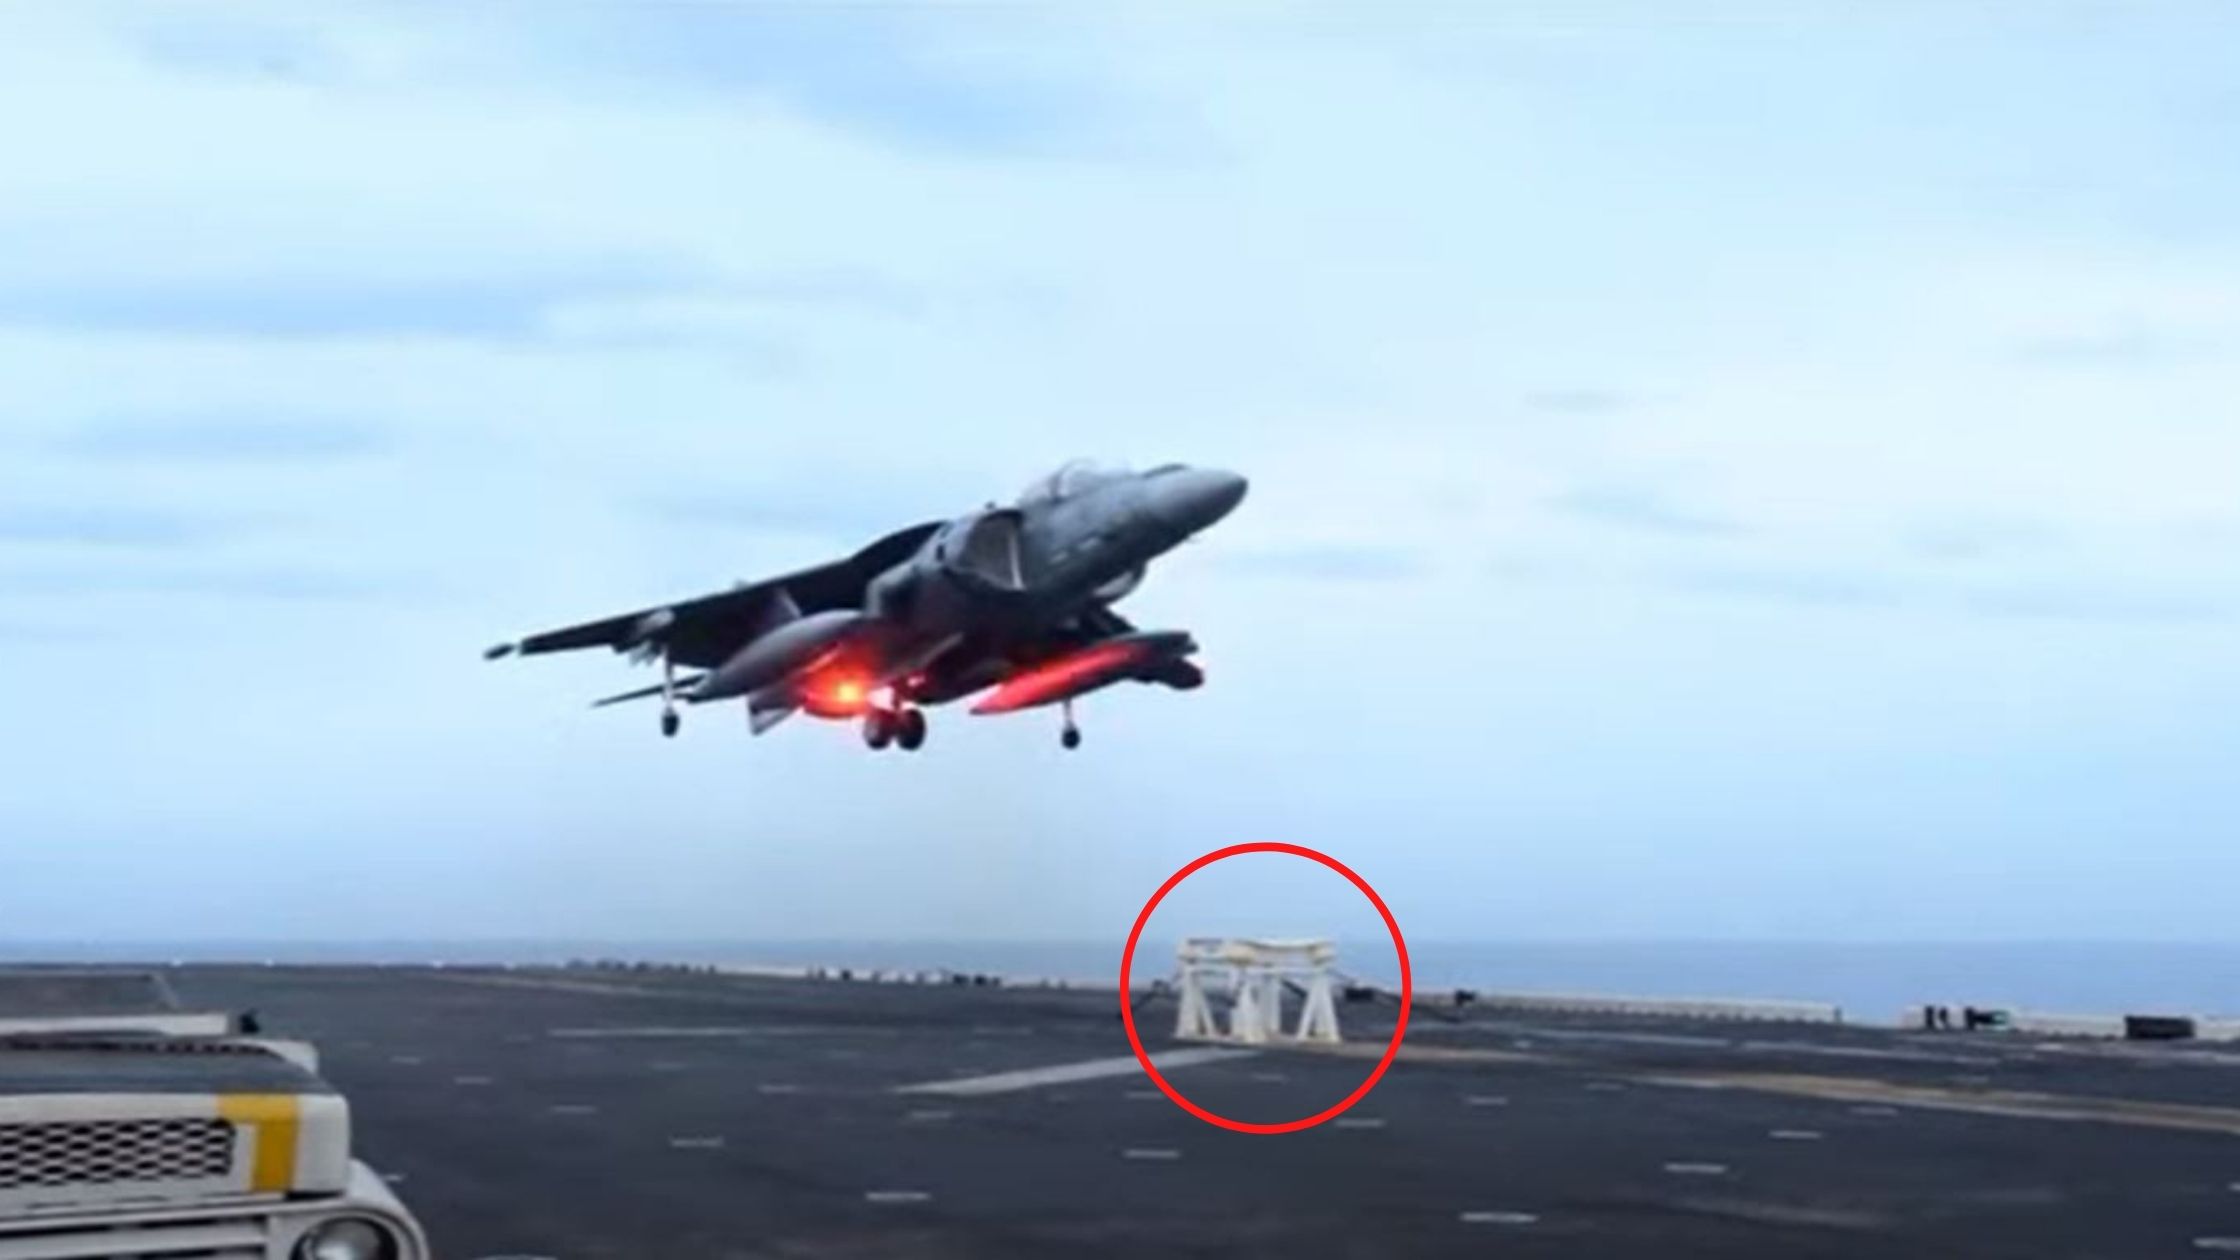 Meet Captain Mahoney, Who Landed A Harrier Jet Precisely On A Stool